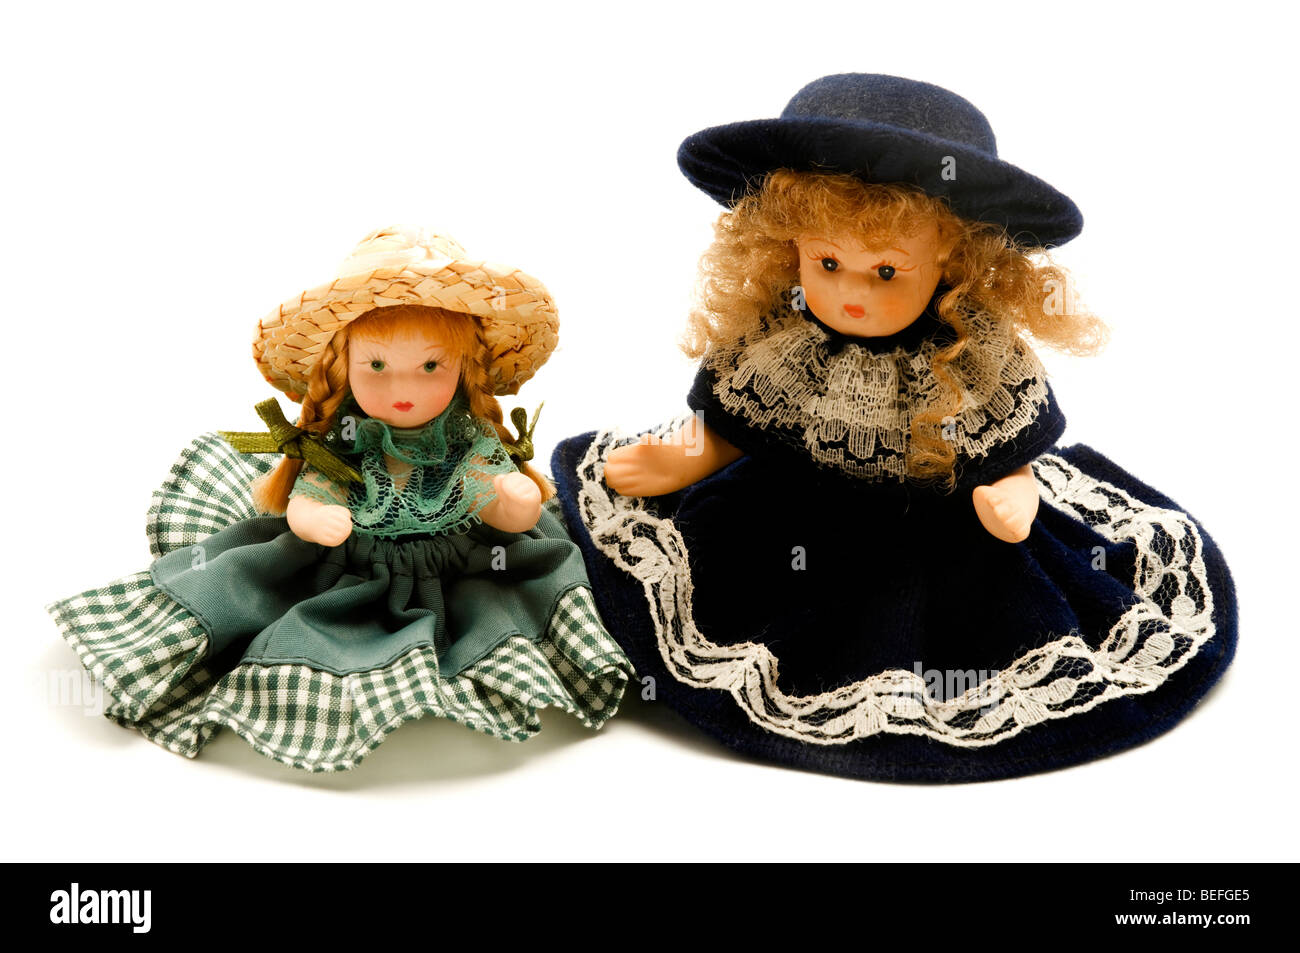 Old porcelain dolls on a white background Stock Photo